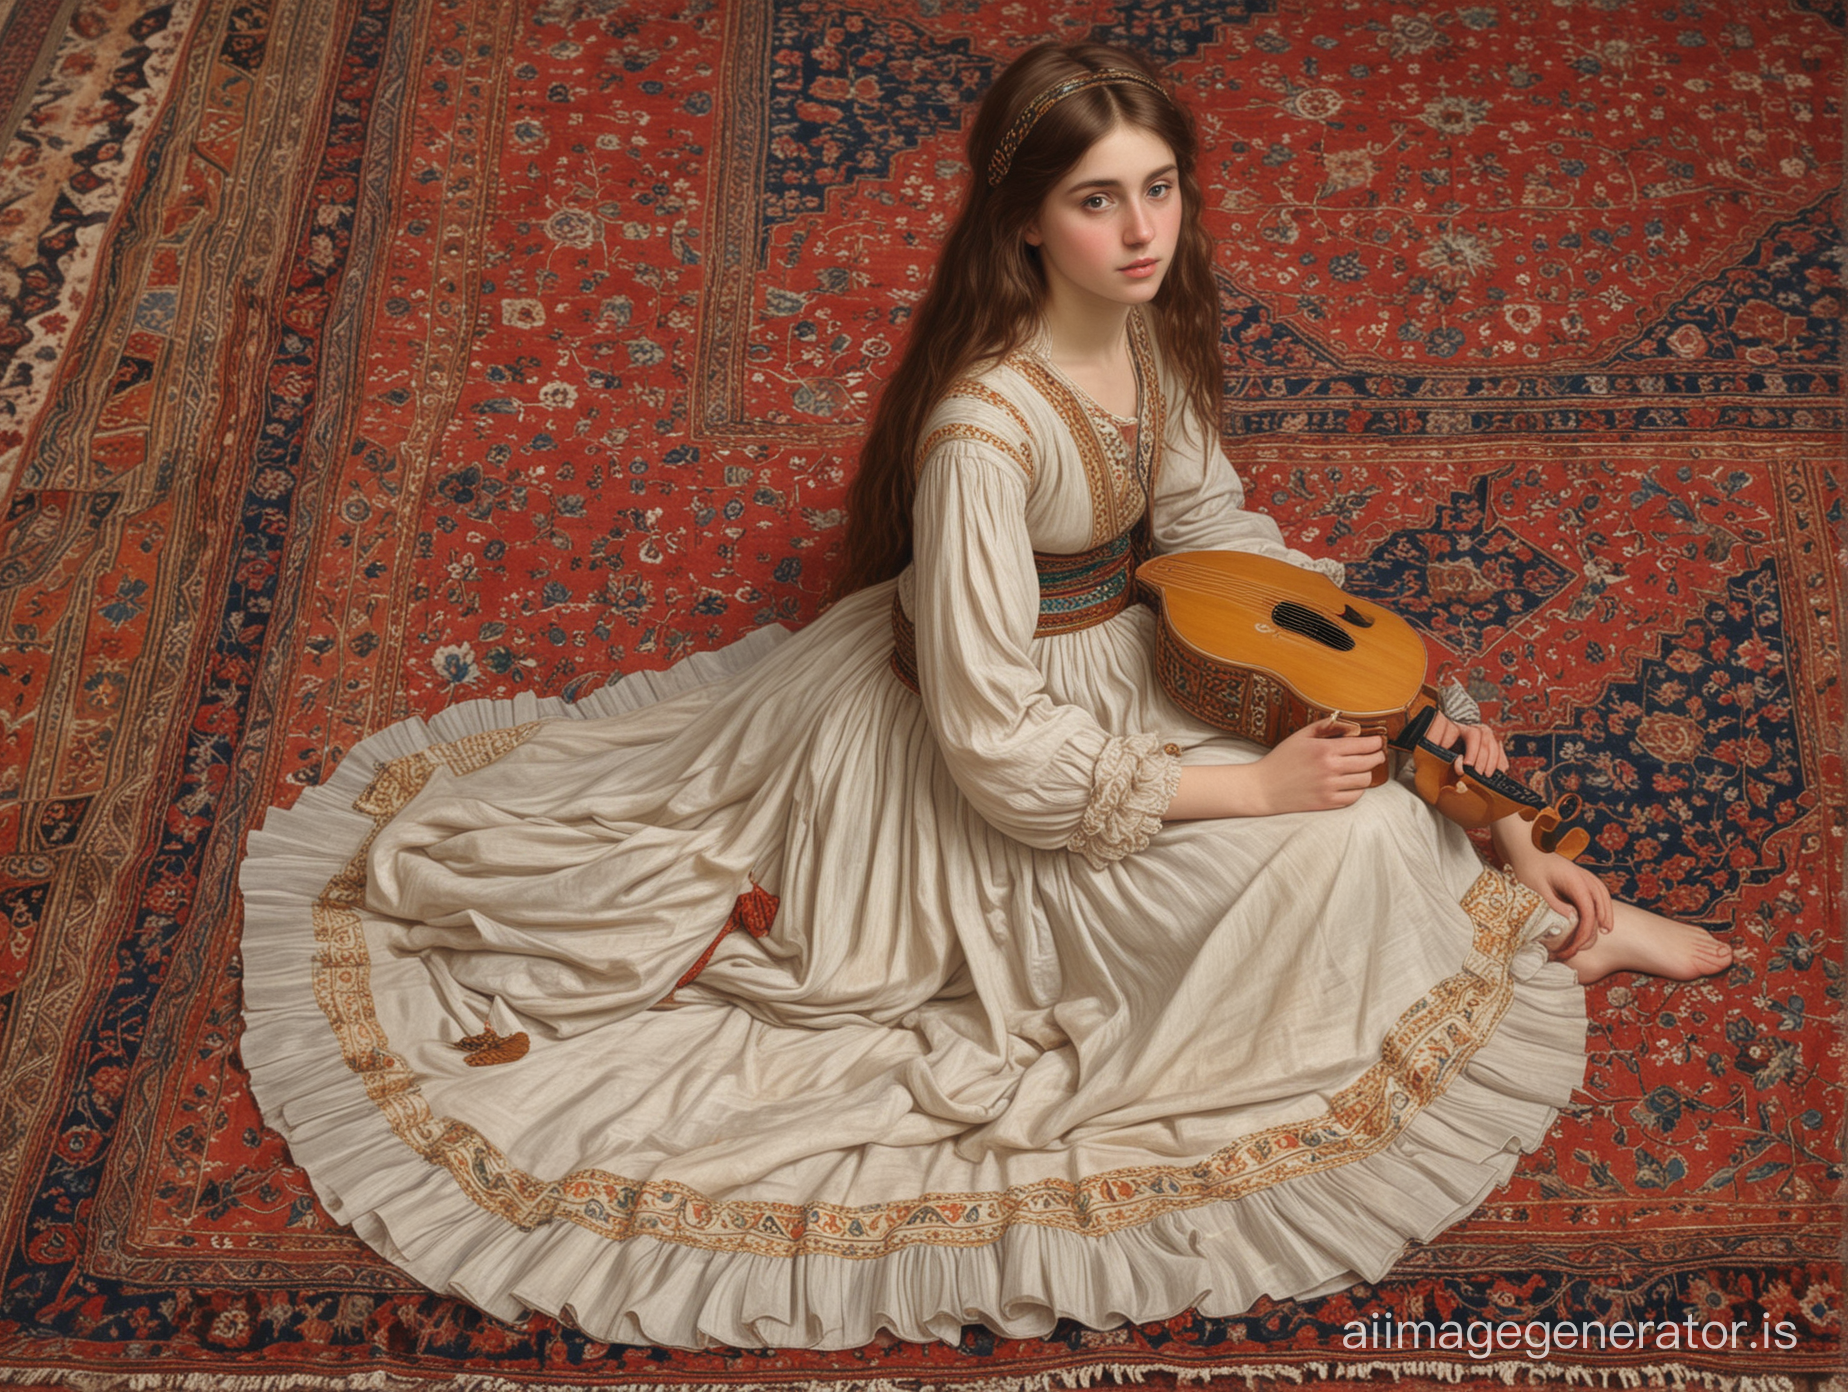 Highly detailed painting, Pre-Raphaelite painting, young girl with bare feet with a small stringed musical instrument, long-necked dombra, sitting on a Persian rug on a sofa, diagonal angle, looking into the lens, soft lighting, style artist John William Waterhouse, medium shot, many details oriental interior, high detail, masterpiece